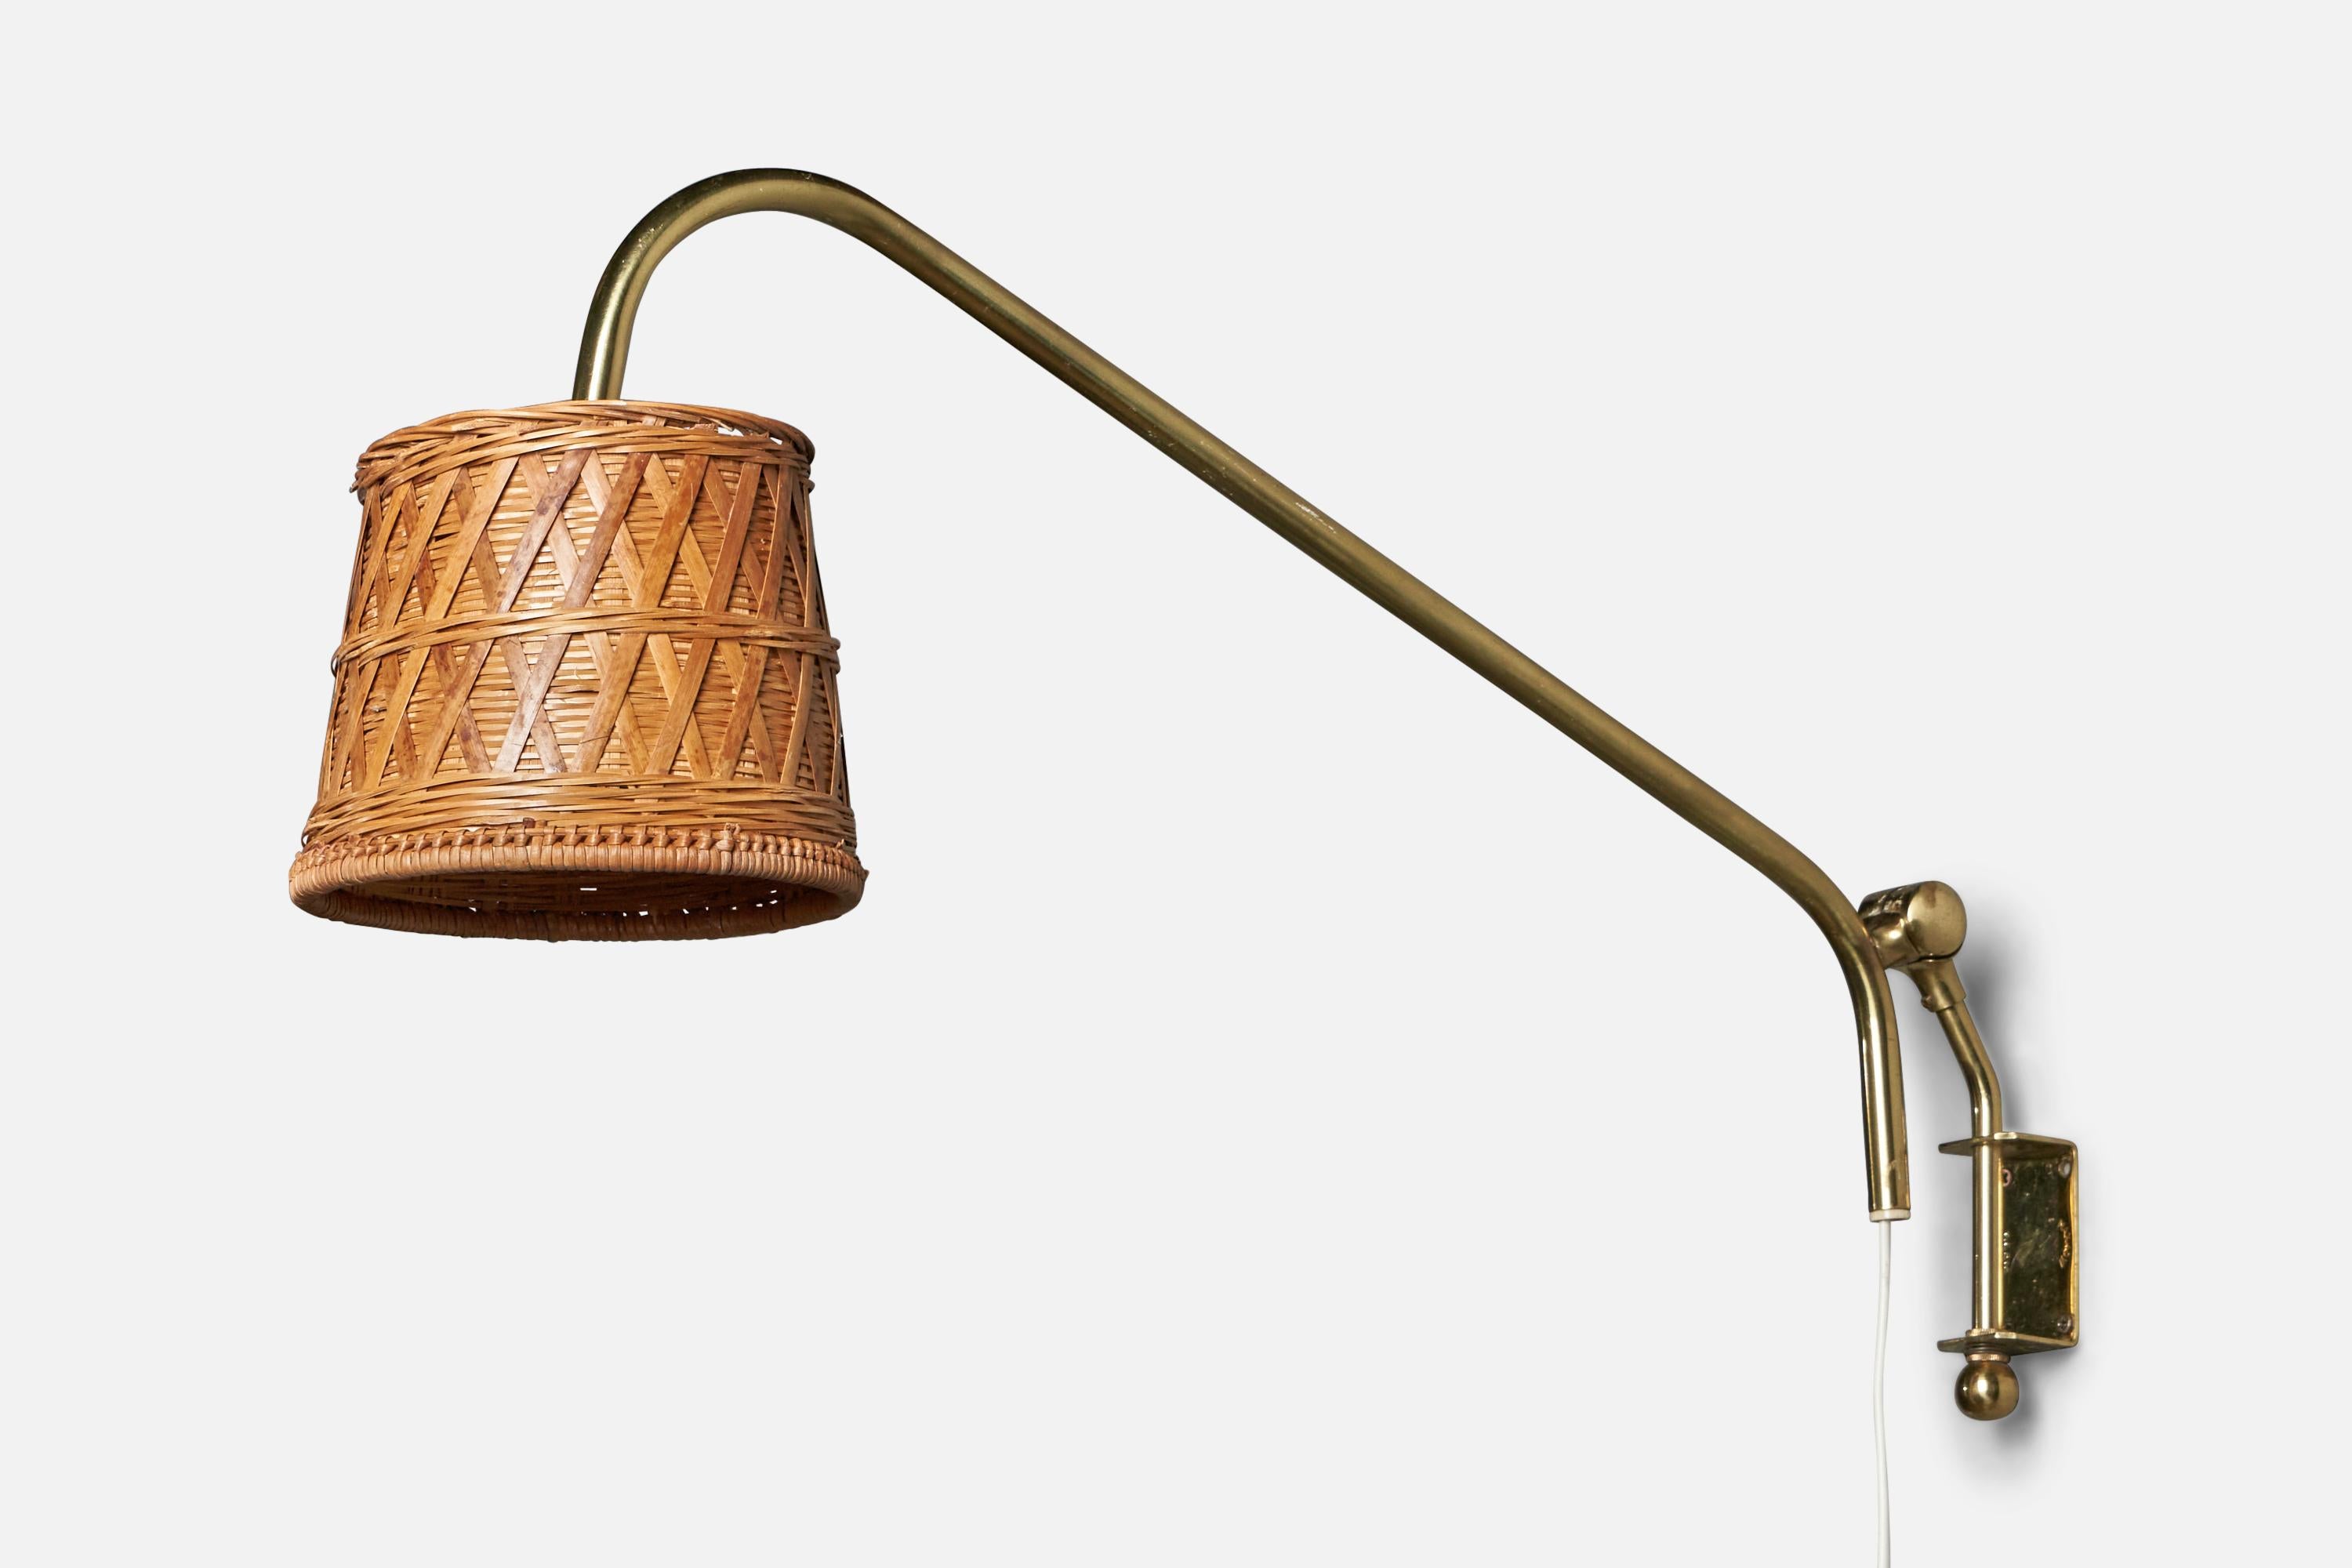 An adjustable brass and rattan wall light designed and produced by Eskilstuna Elektrofabrik, Sweden, c. 1960s.

Overall Dimensions (inches): 11” H x 6” W x 25.5” D
Back Plate Dimensions (inches): 2.5” H x 1.4” W x 1.25” D
Bulb Specifications: E-14